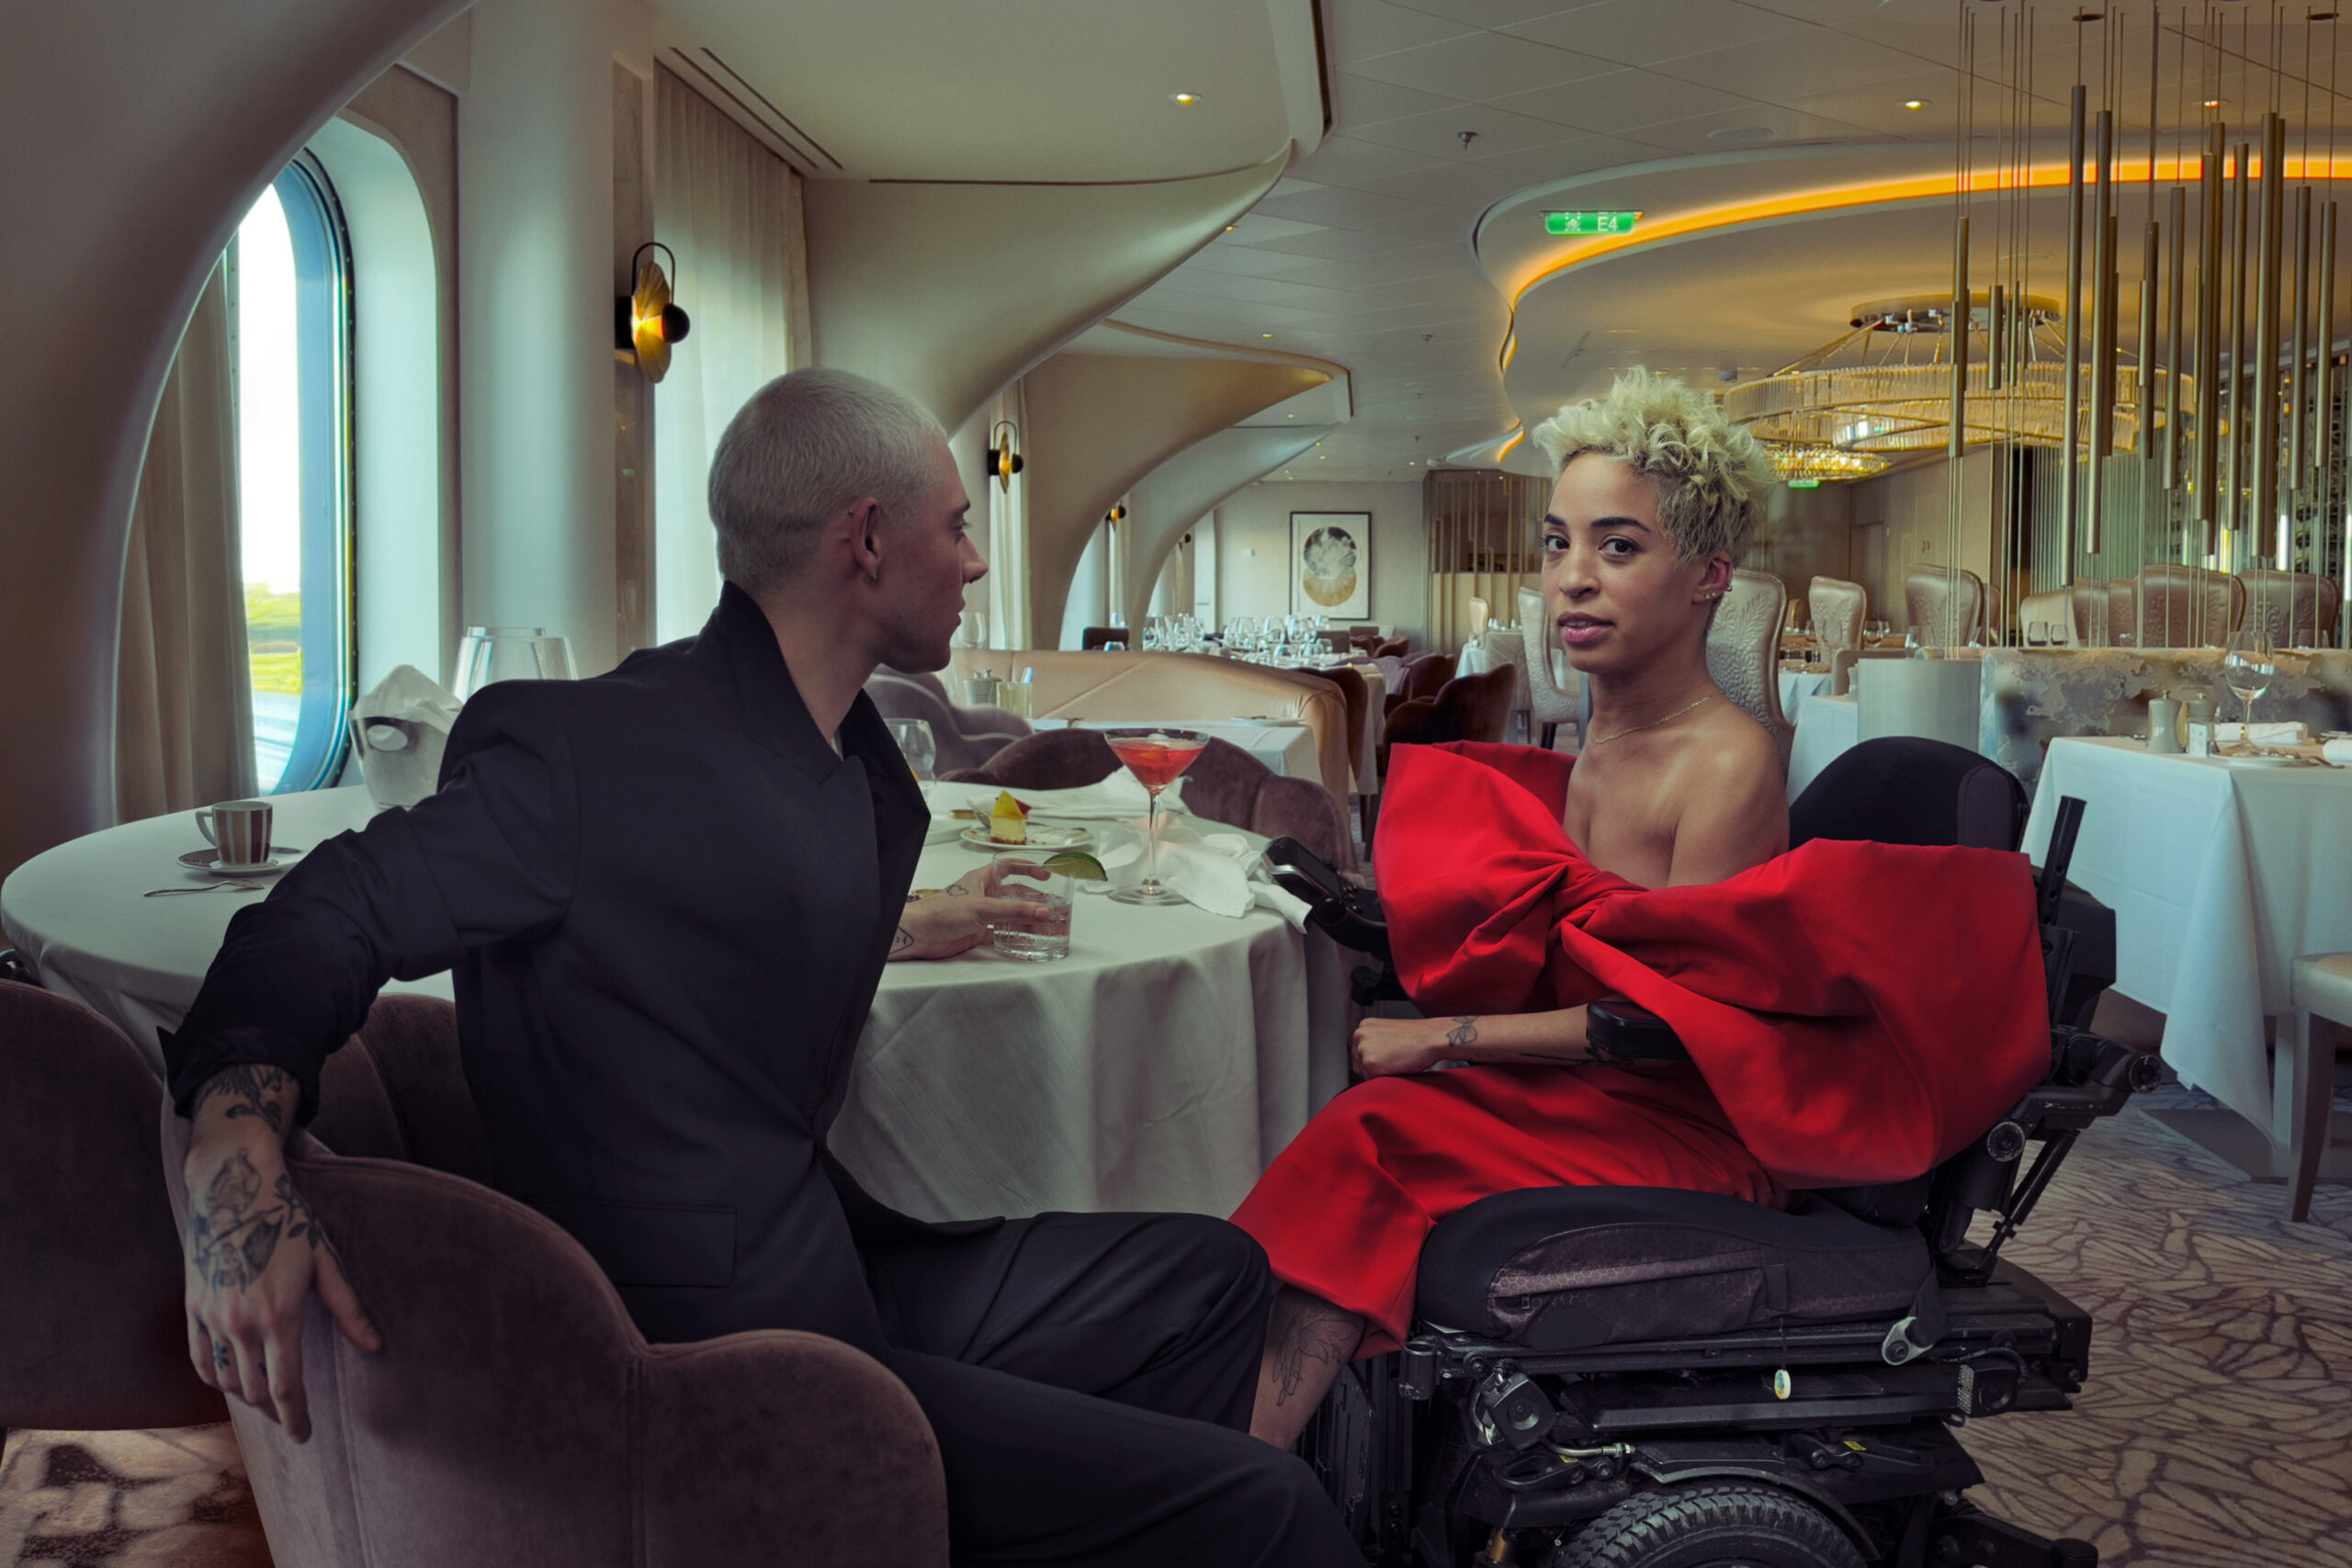 Jillian Mercado ¬– actress and American fashion model, one of the few professional models who has a visible physical disability in the fashion industry ¬– enjoys a meal. (Photo Credit: Annie Leibovitz / Celebrity Cruises / AIPP)